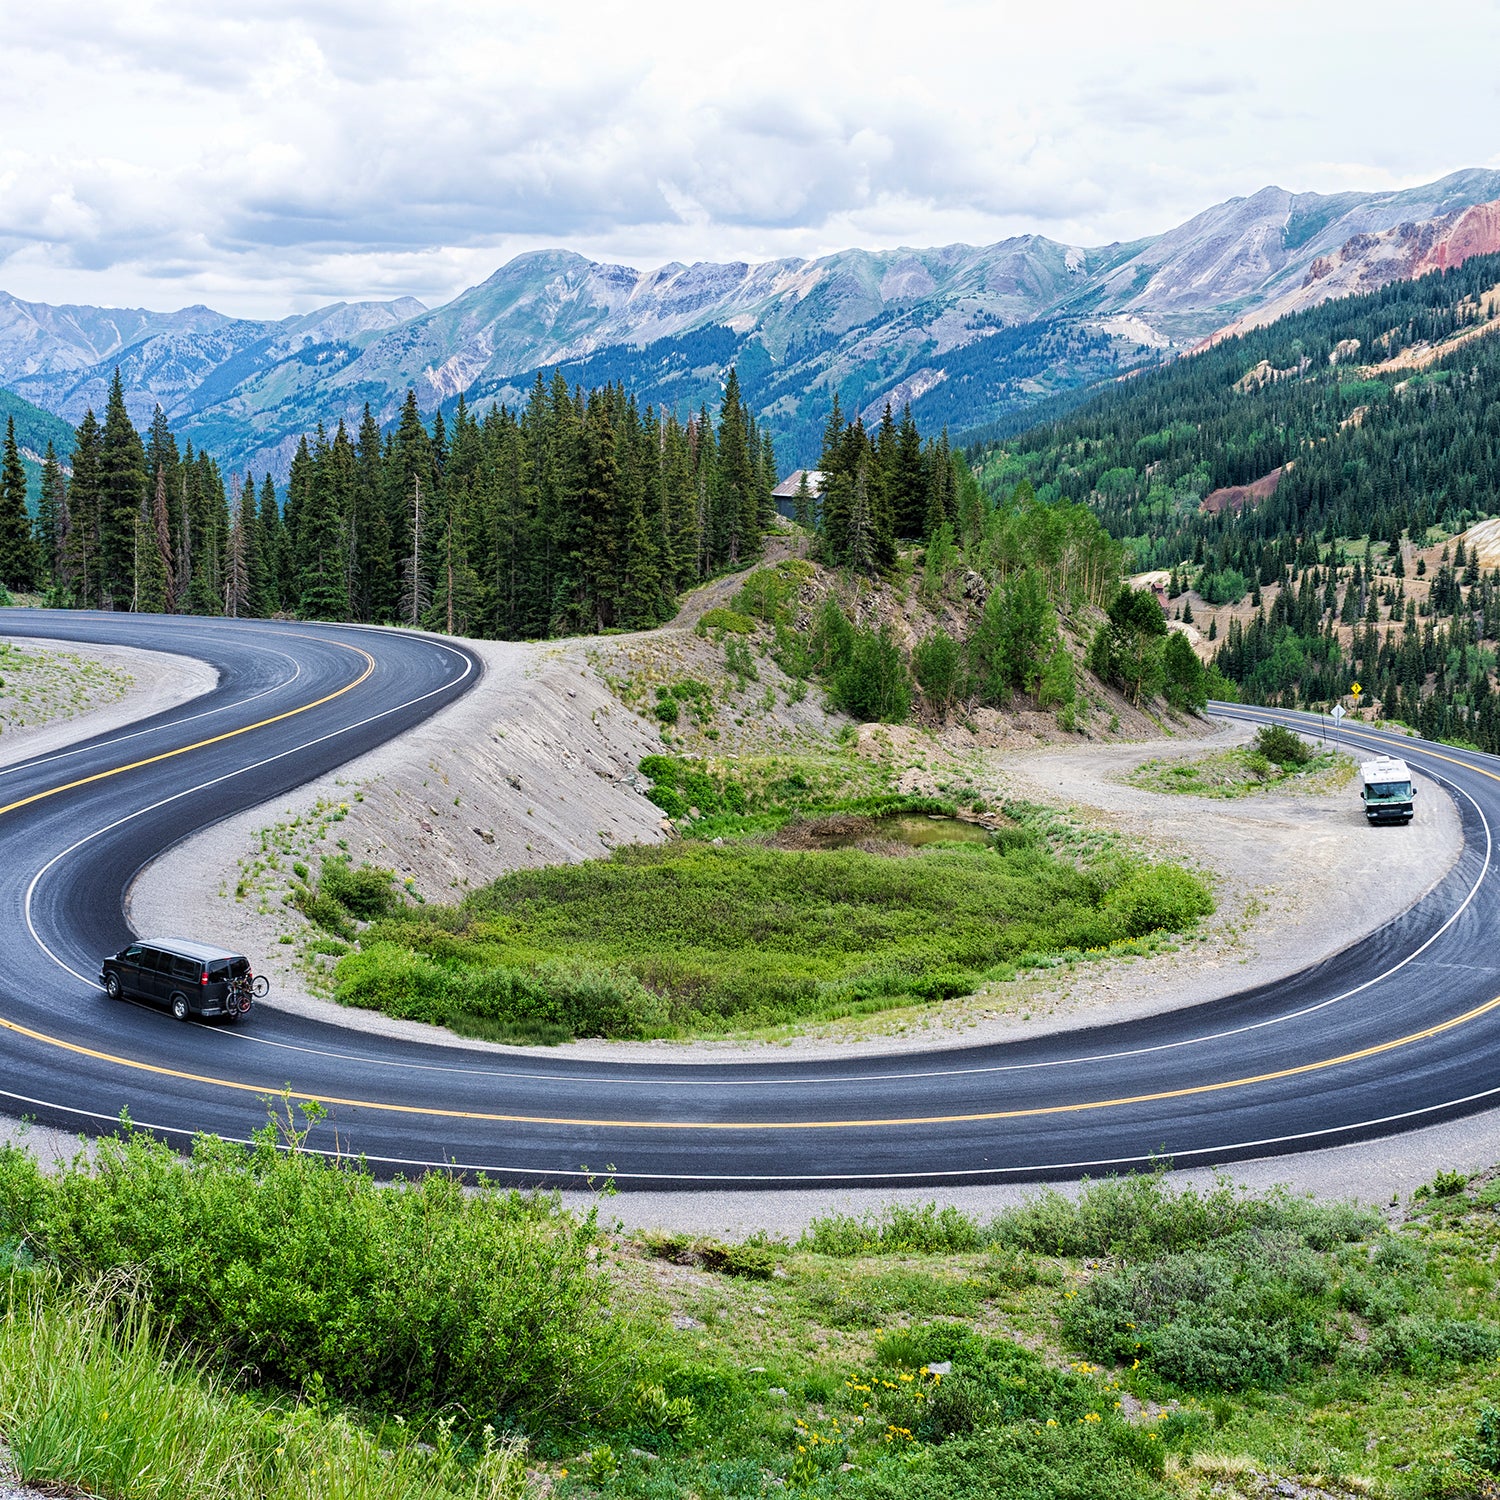 How to Spend the Weekend on Colorado's Million Dollar Highway